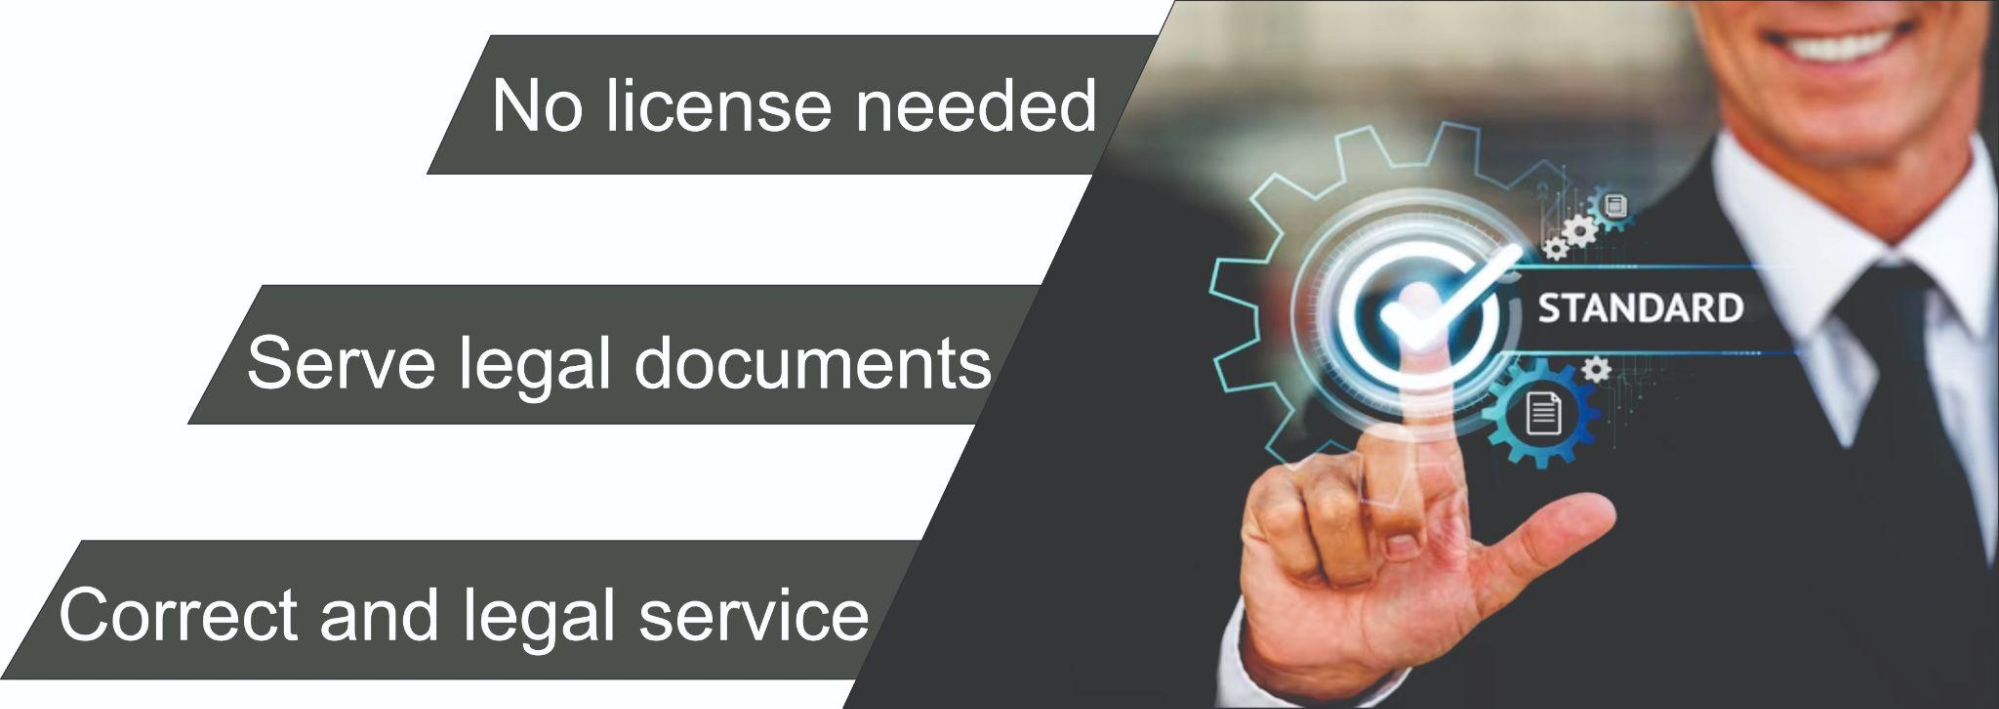 No license needed serve legal documents.